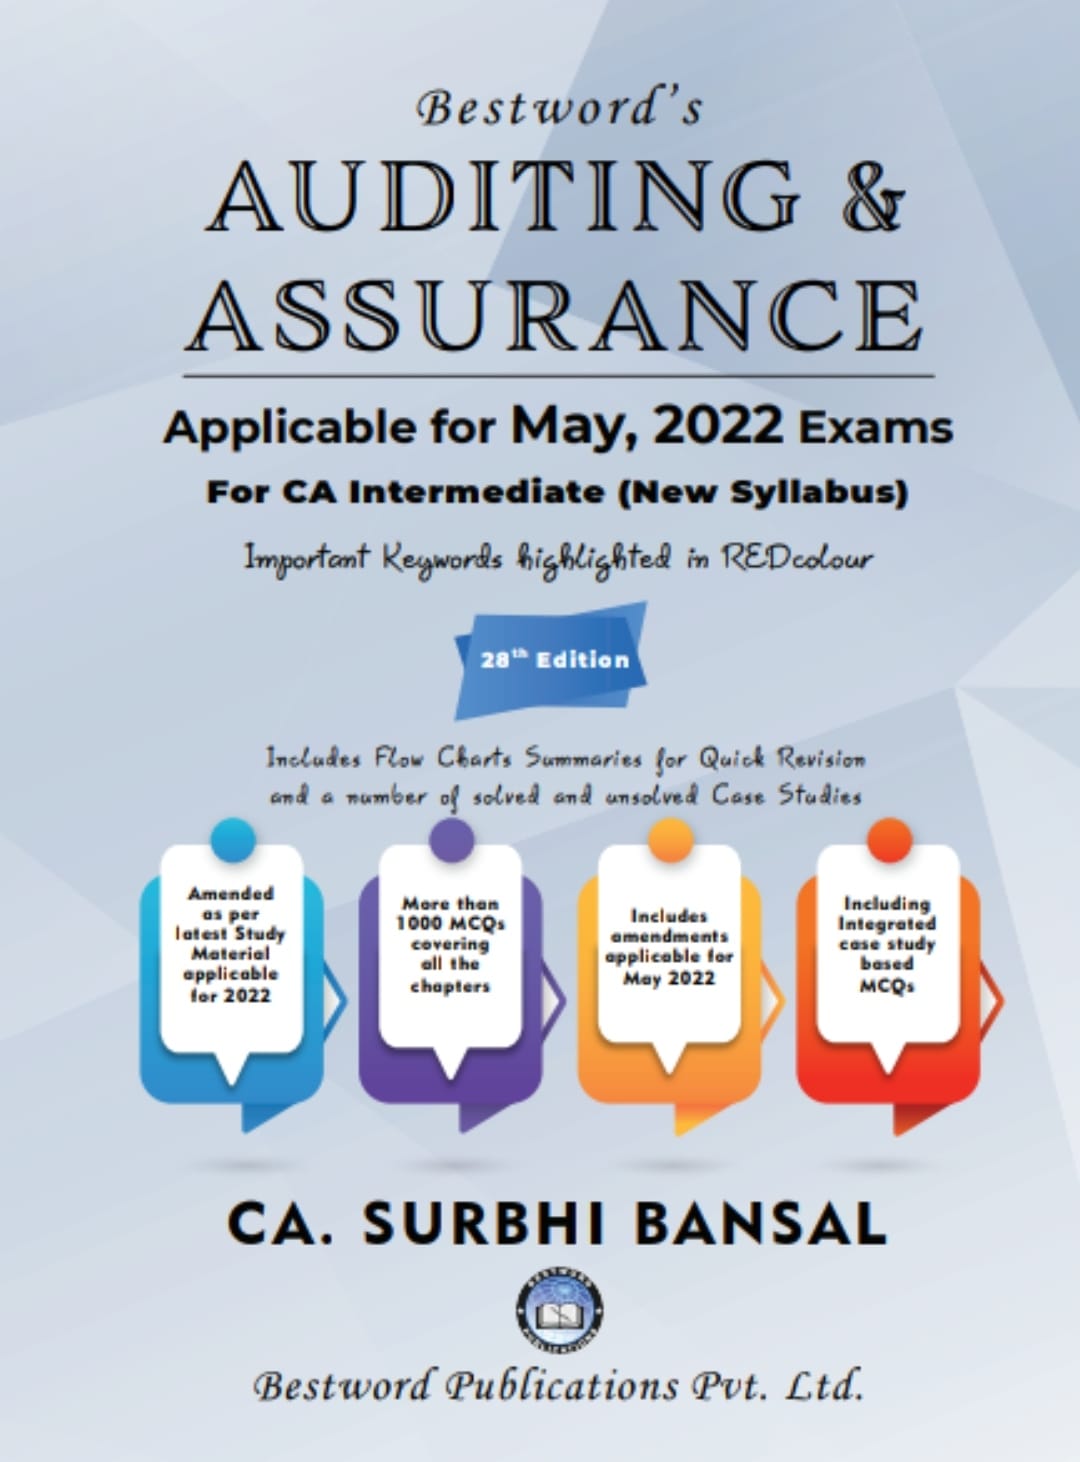 bestword's-auditing-and-assurance---by-ca-surbhi-bansal---28th-edition---for-ca-(intermediate)-may-2022-exams-(new-syllabus)